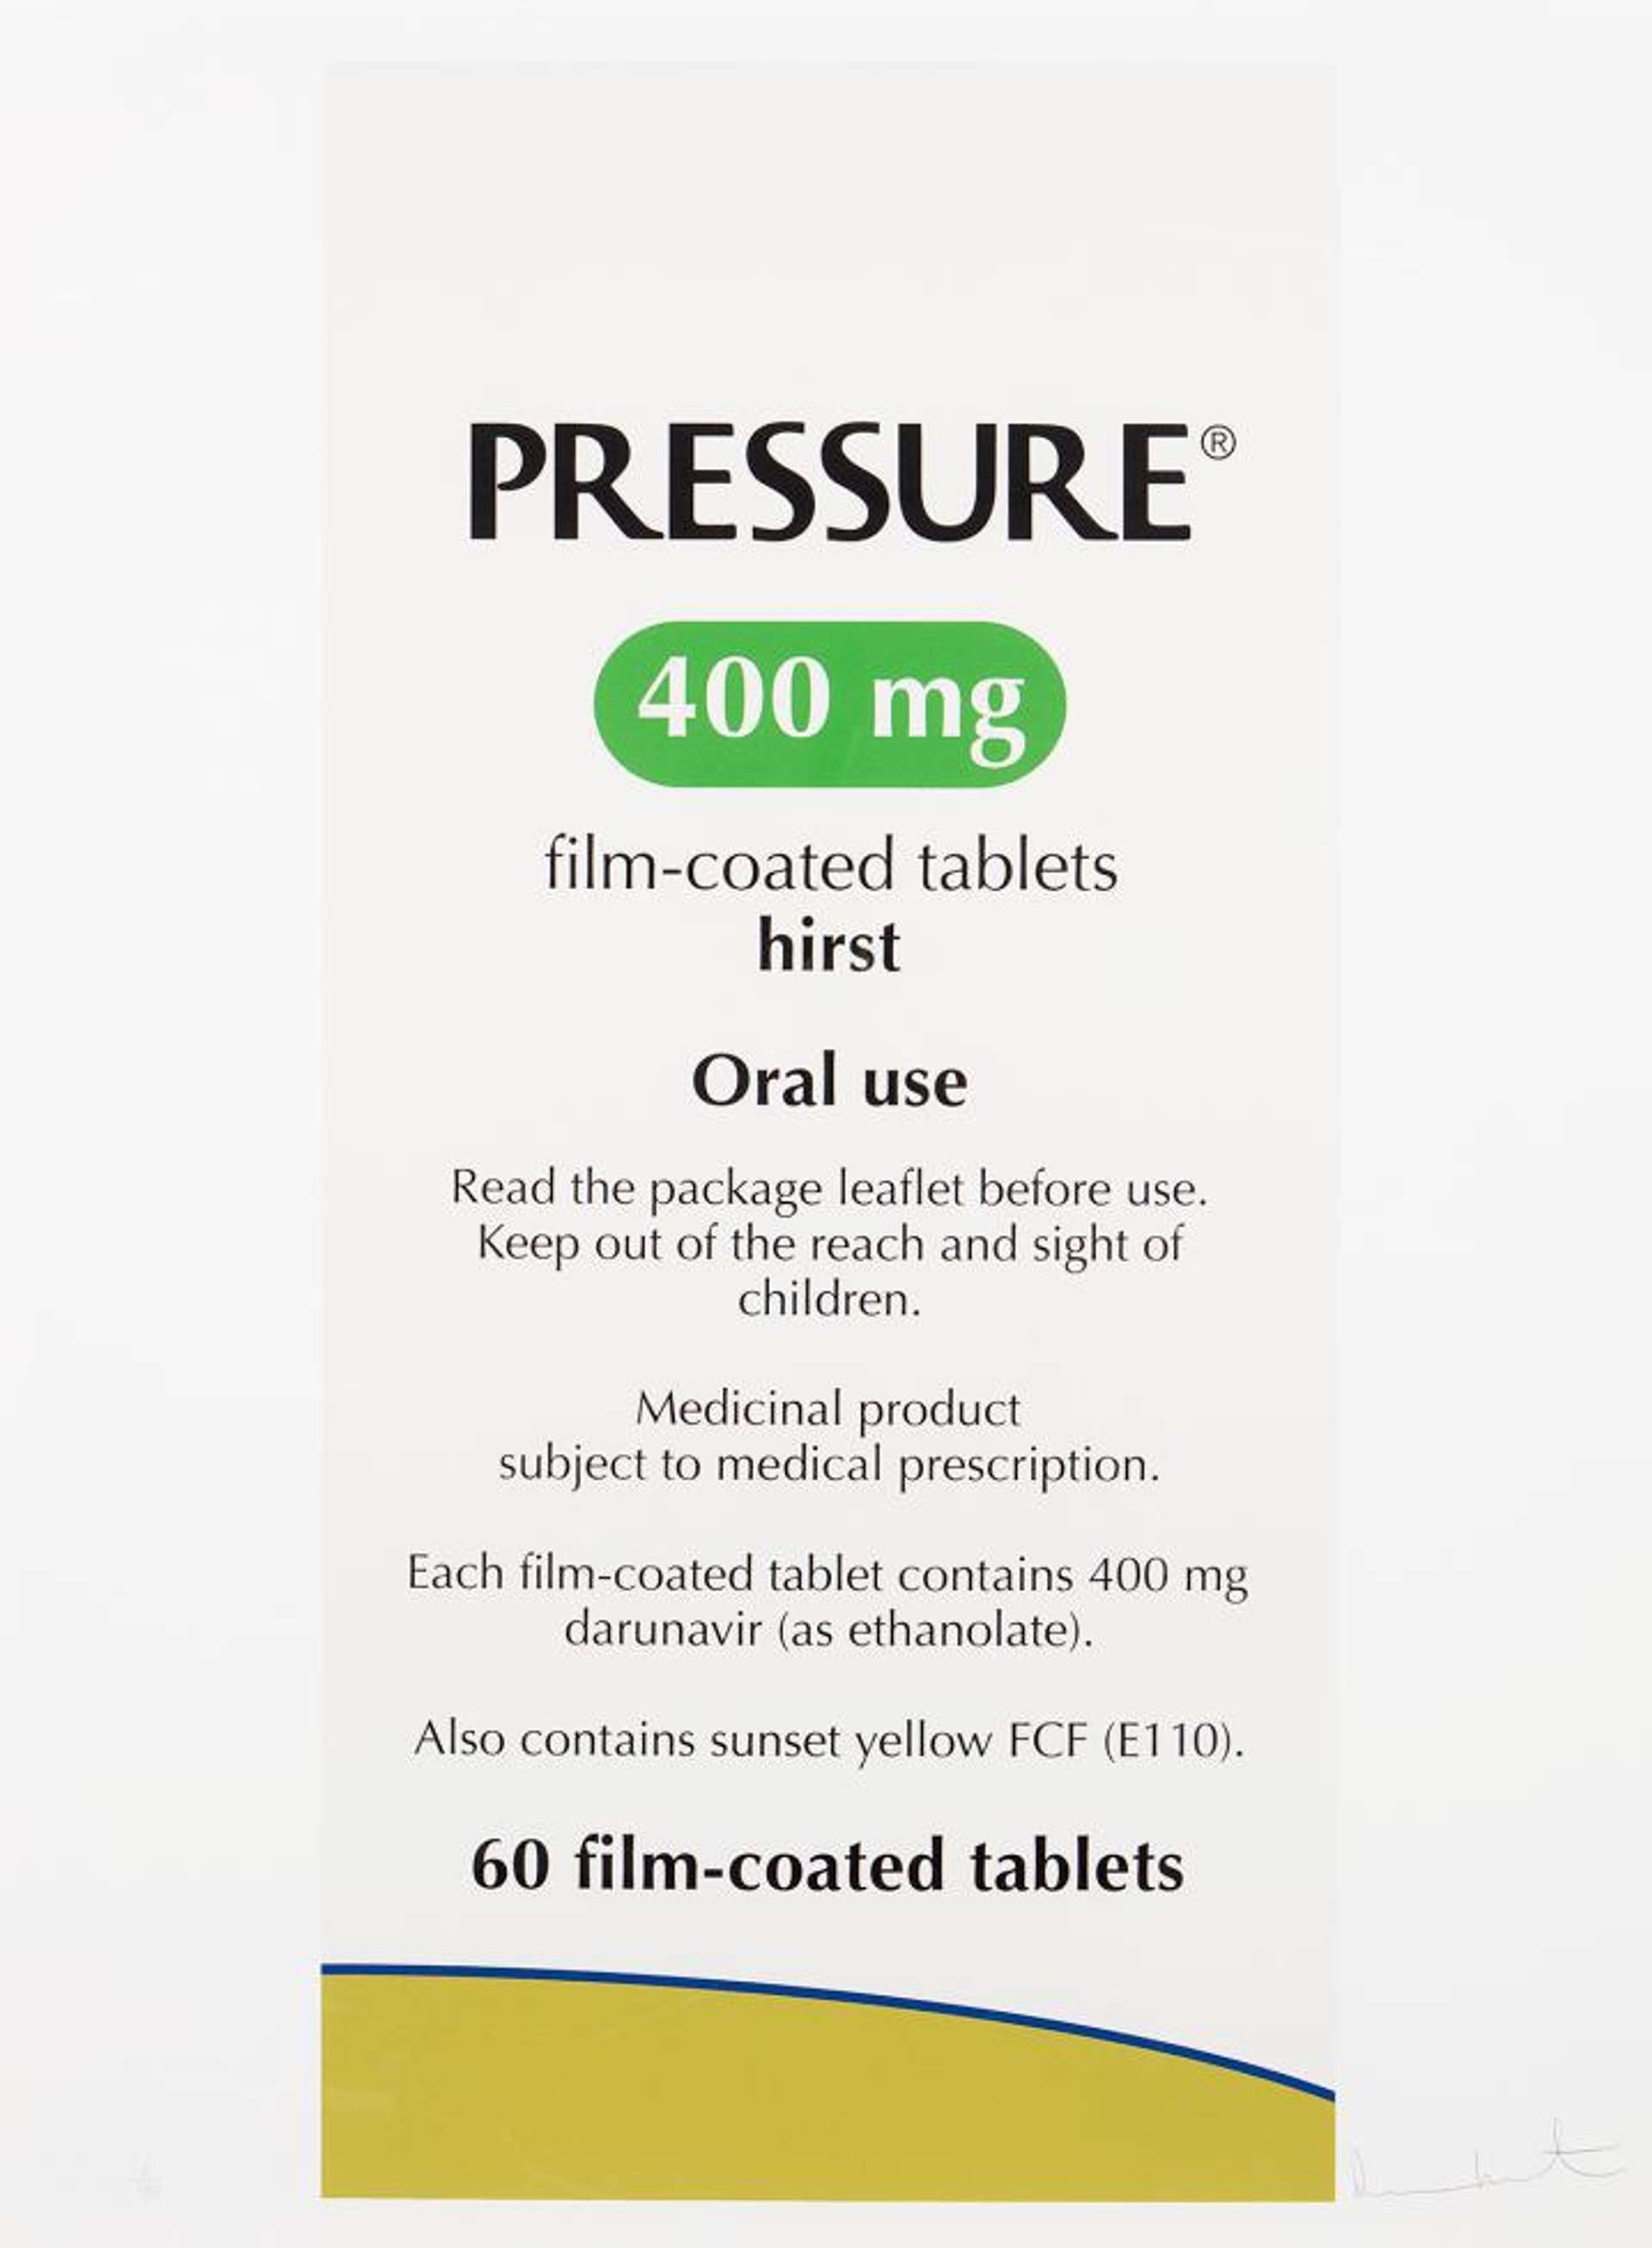 Damien Hirst’s Pressure. A screenprint of a white pharmaceutical box with various texts including “pressure ® 400 mg”.